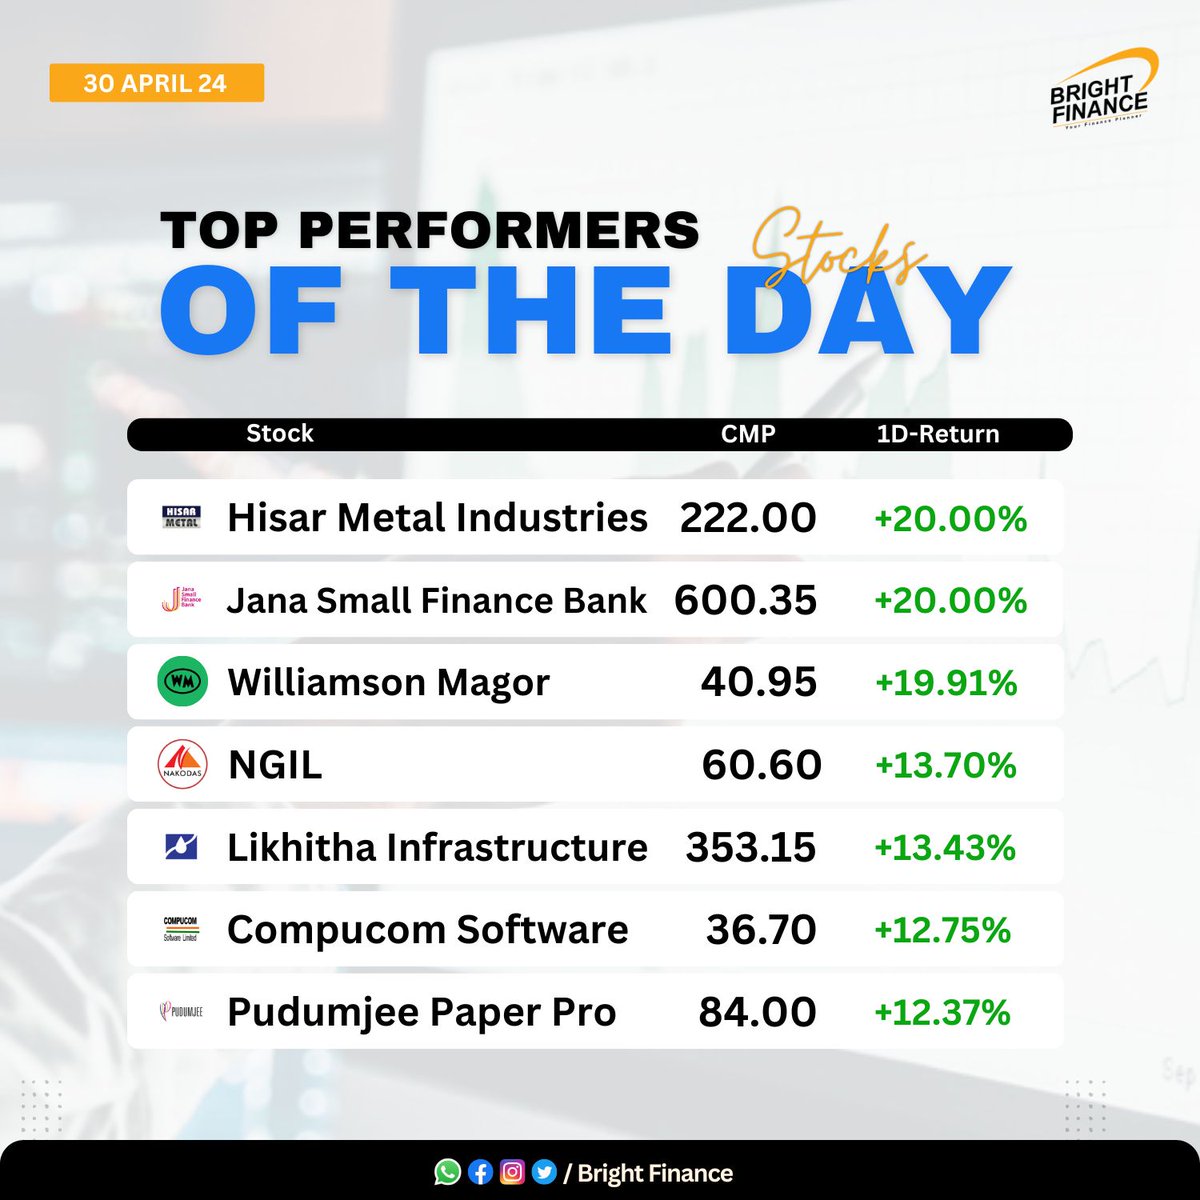 Don't miss out on today's winners! 💼💰
Check out the top-performing stocks and stay informed for your next investment move. 🚀📈

#StockMarket #TopStocks #InvestingTips #TopPerformers #NSE #BSE #StockMarketIndia #Stocks #April #StockPerformance